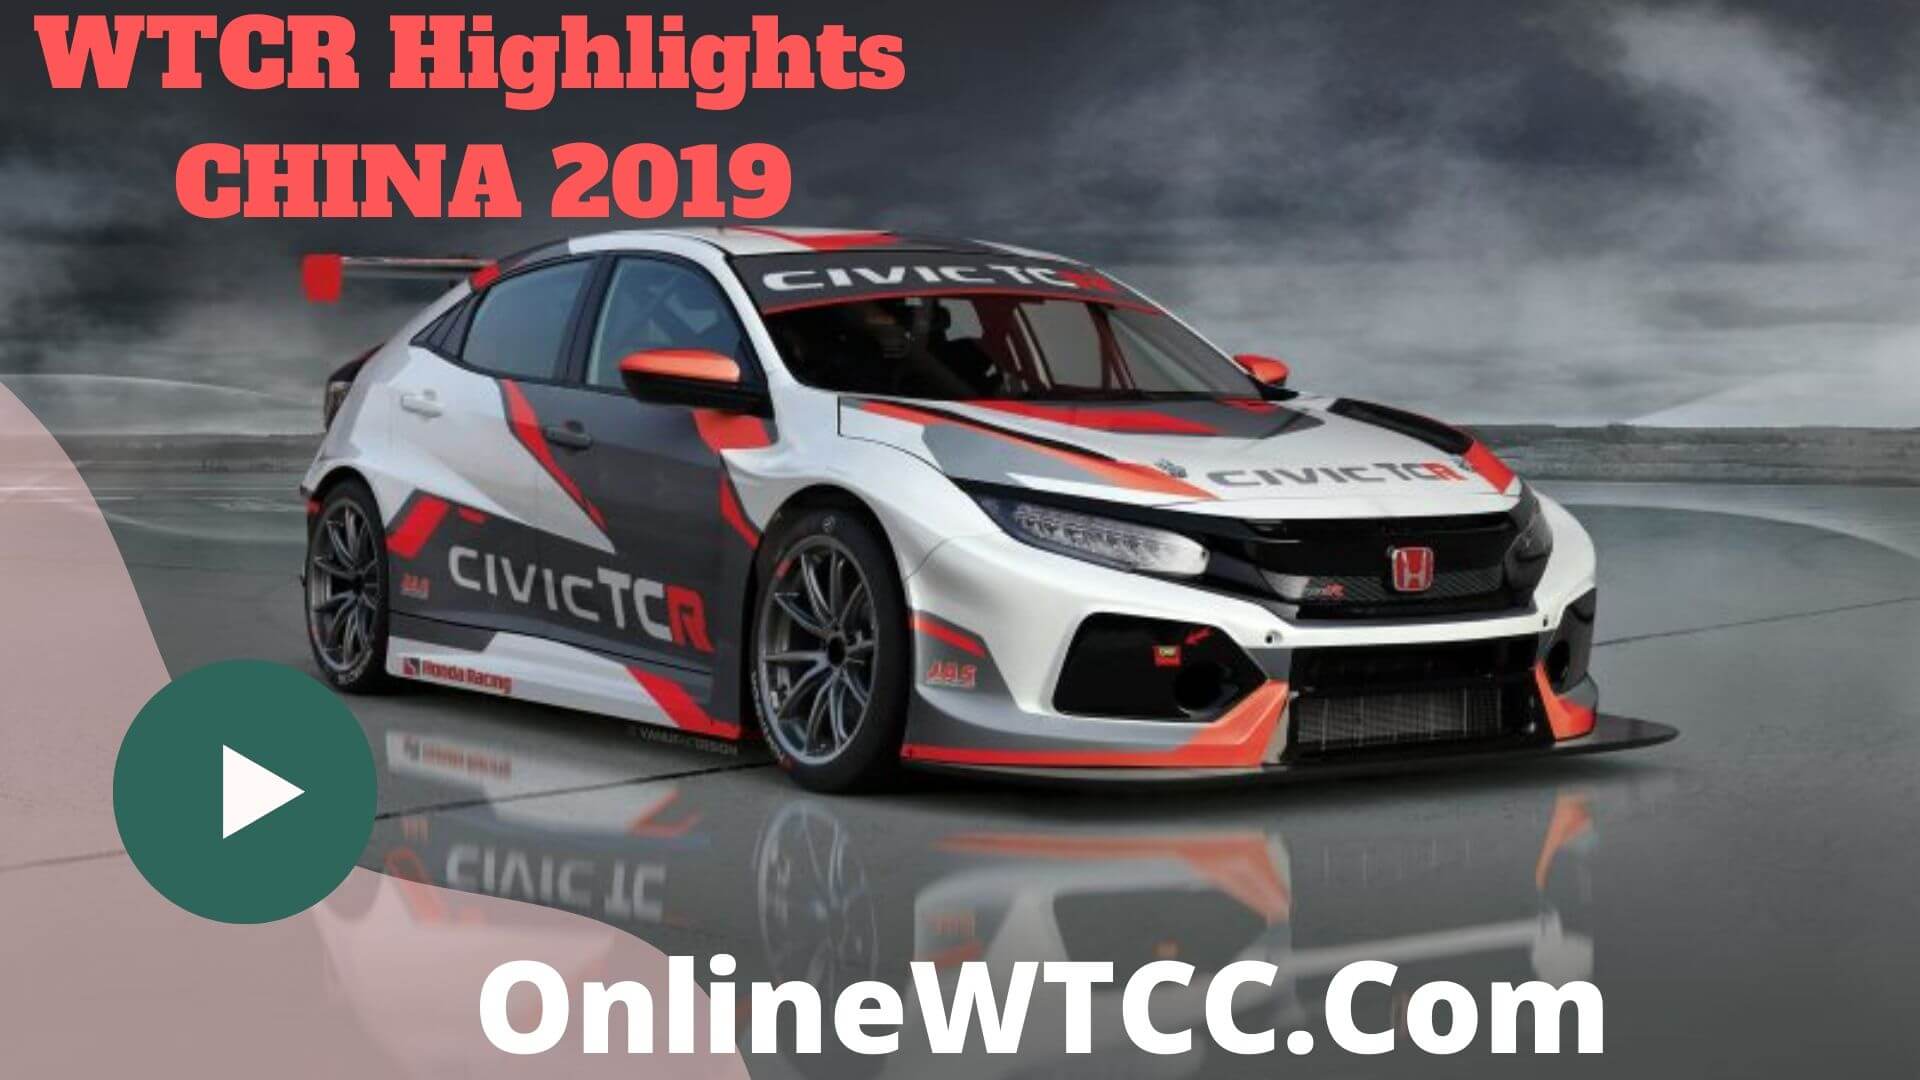 China WTCR Highlights 2019